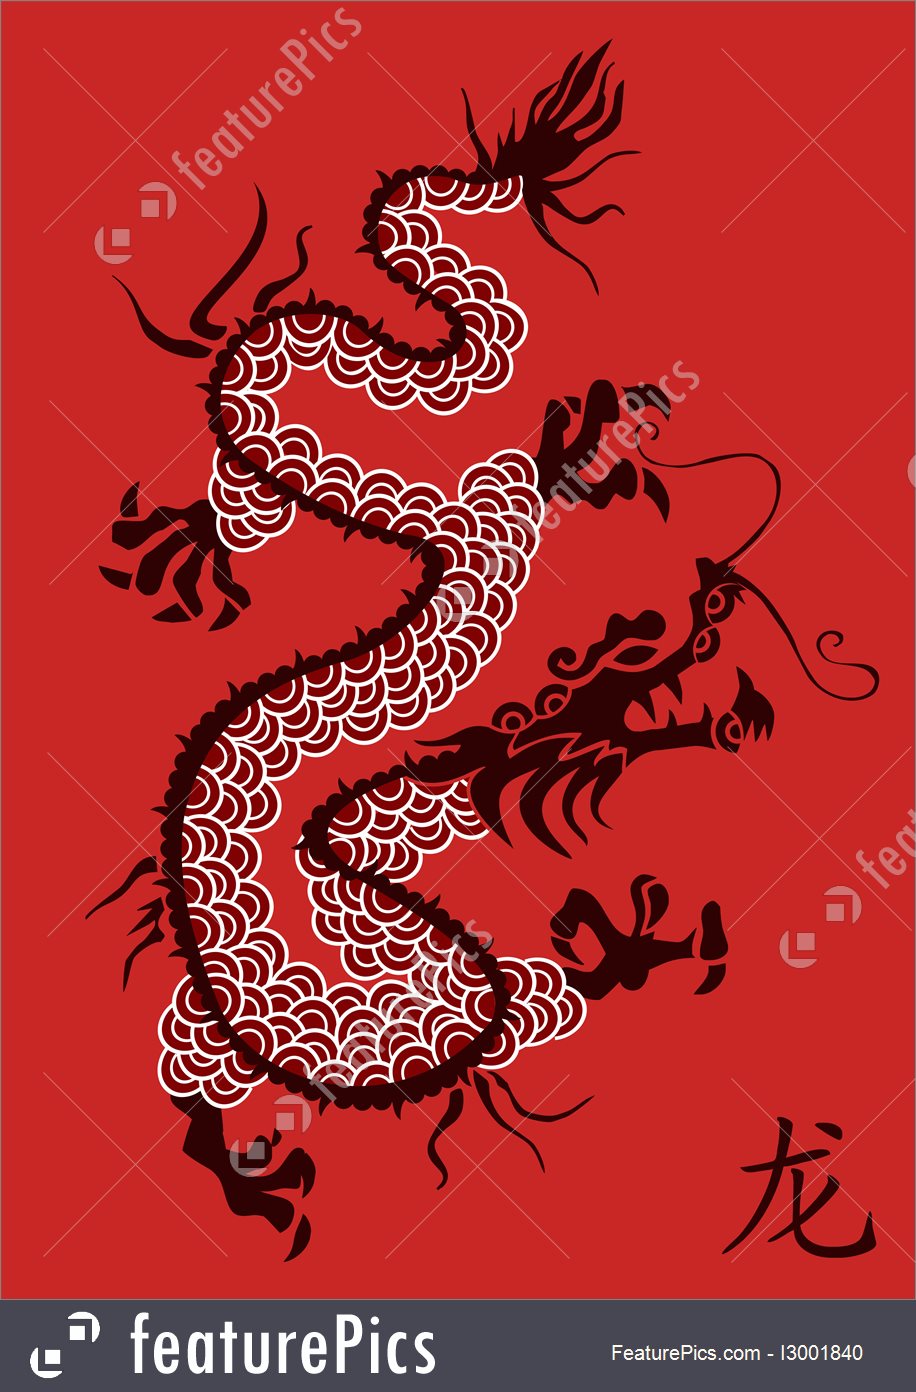 Red Dragon Vector at Vectorified.com | Collection of Red Dragon Vector ...